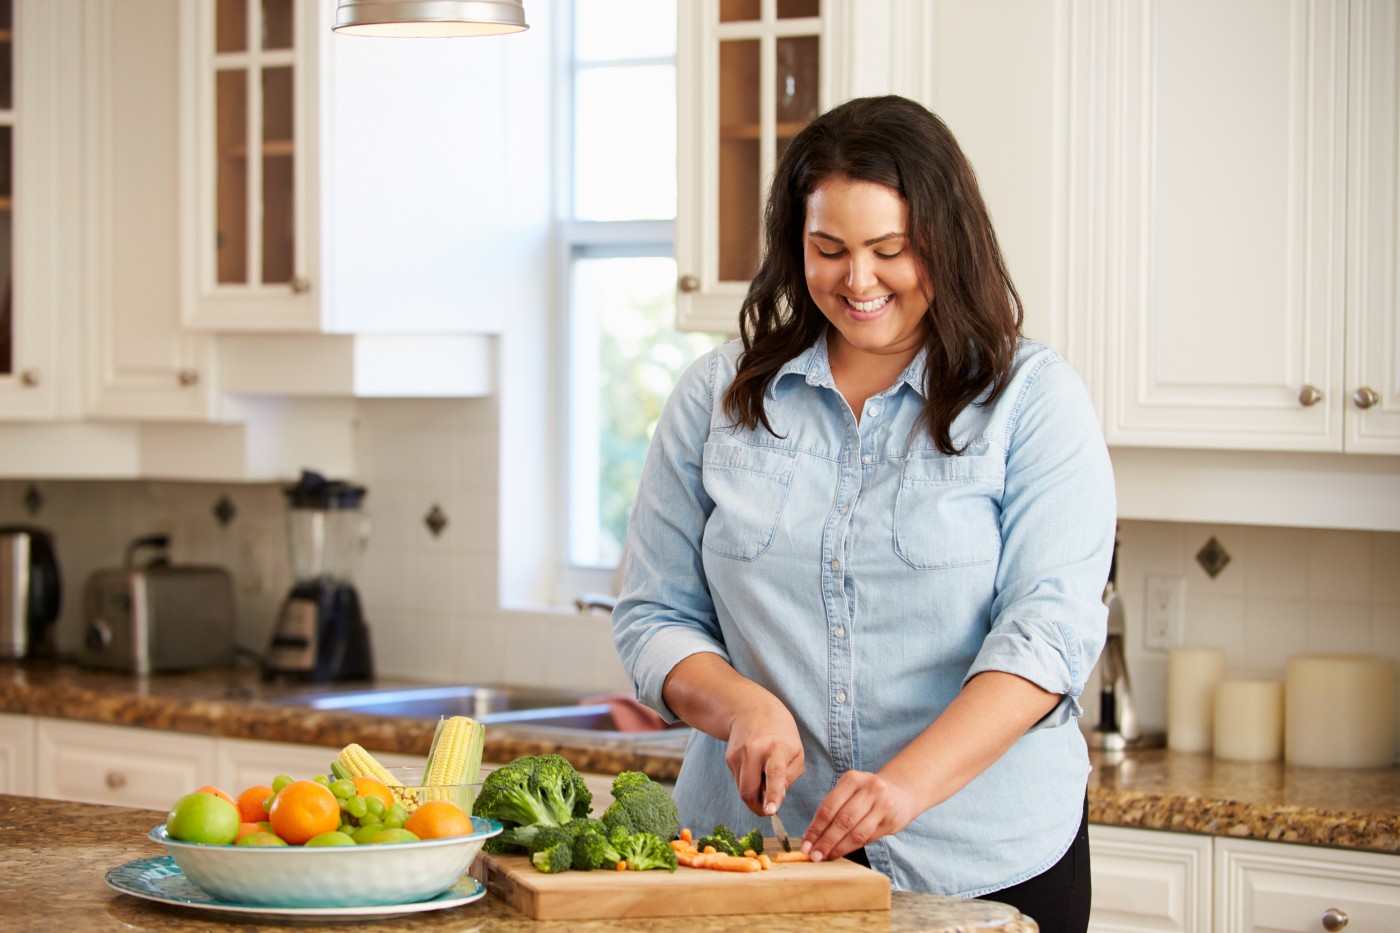 Having Food Visible Throughout the House and Low Self-esteem Associated With Obesity